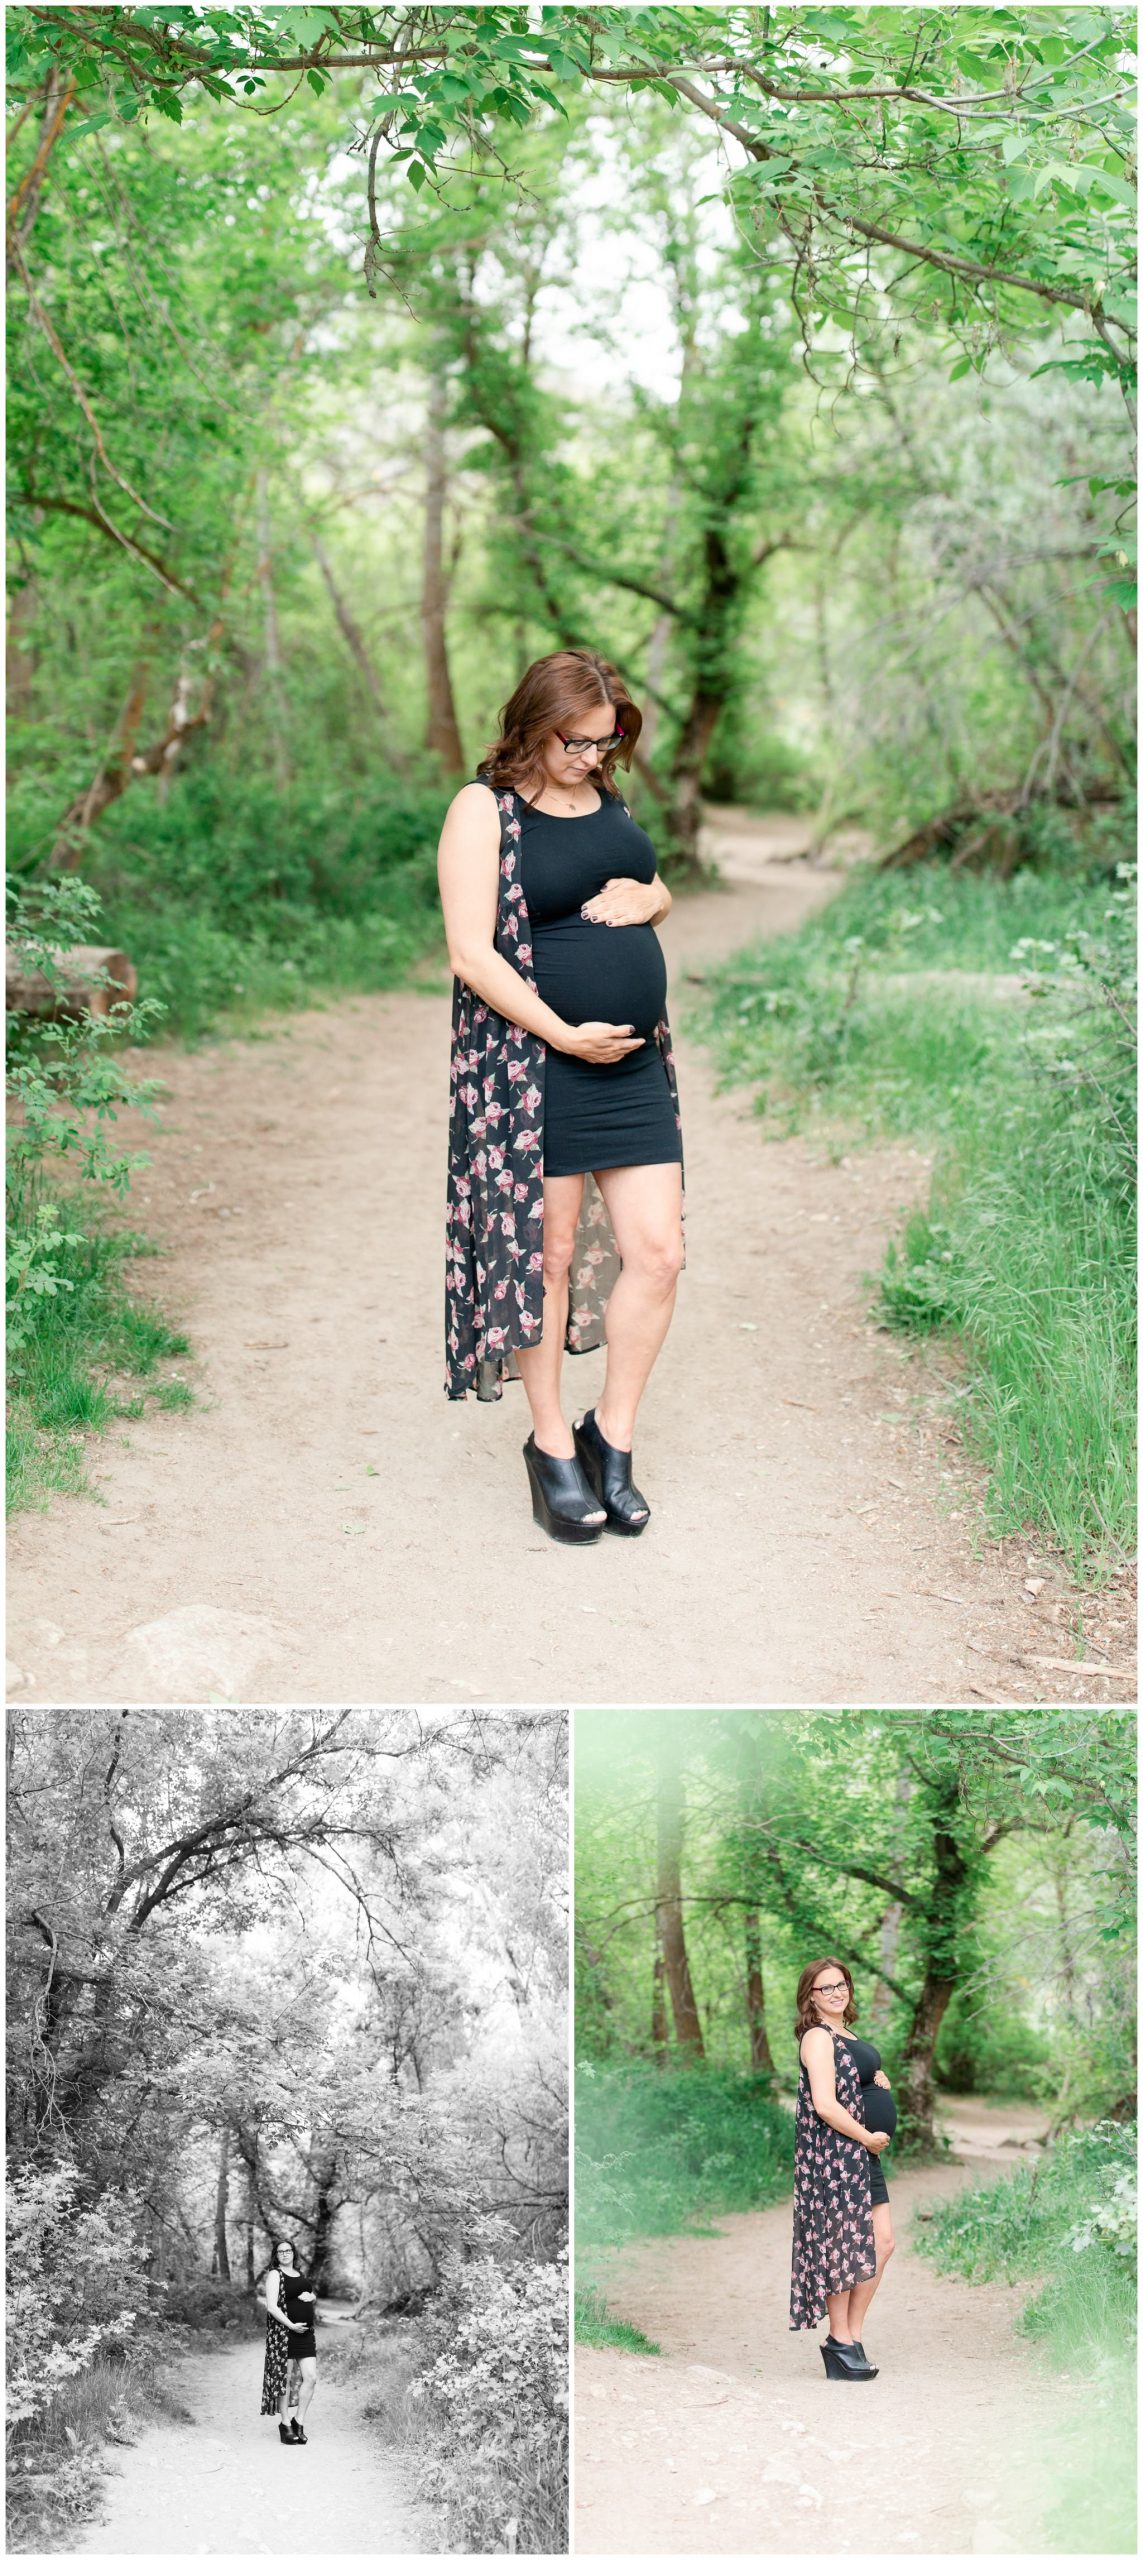 Maternity Pictures taken in Boise Idaho near the Foothills by the Military reserve. Woman wearing a black maternity dress.